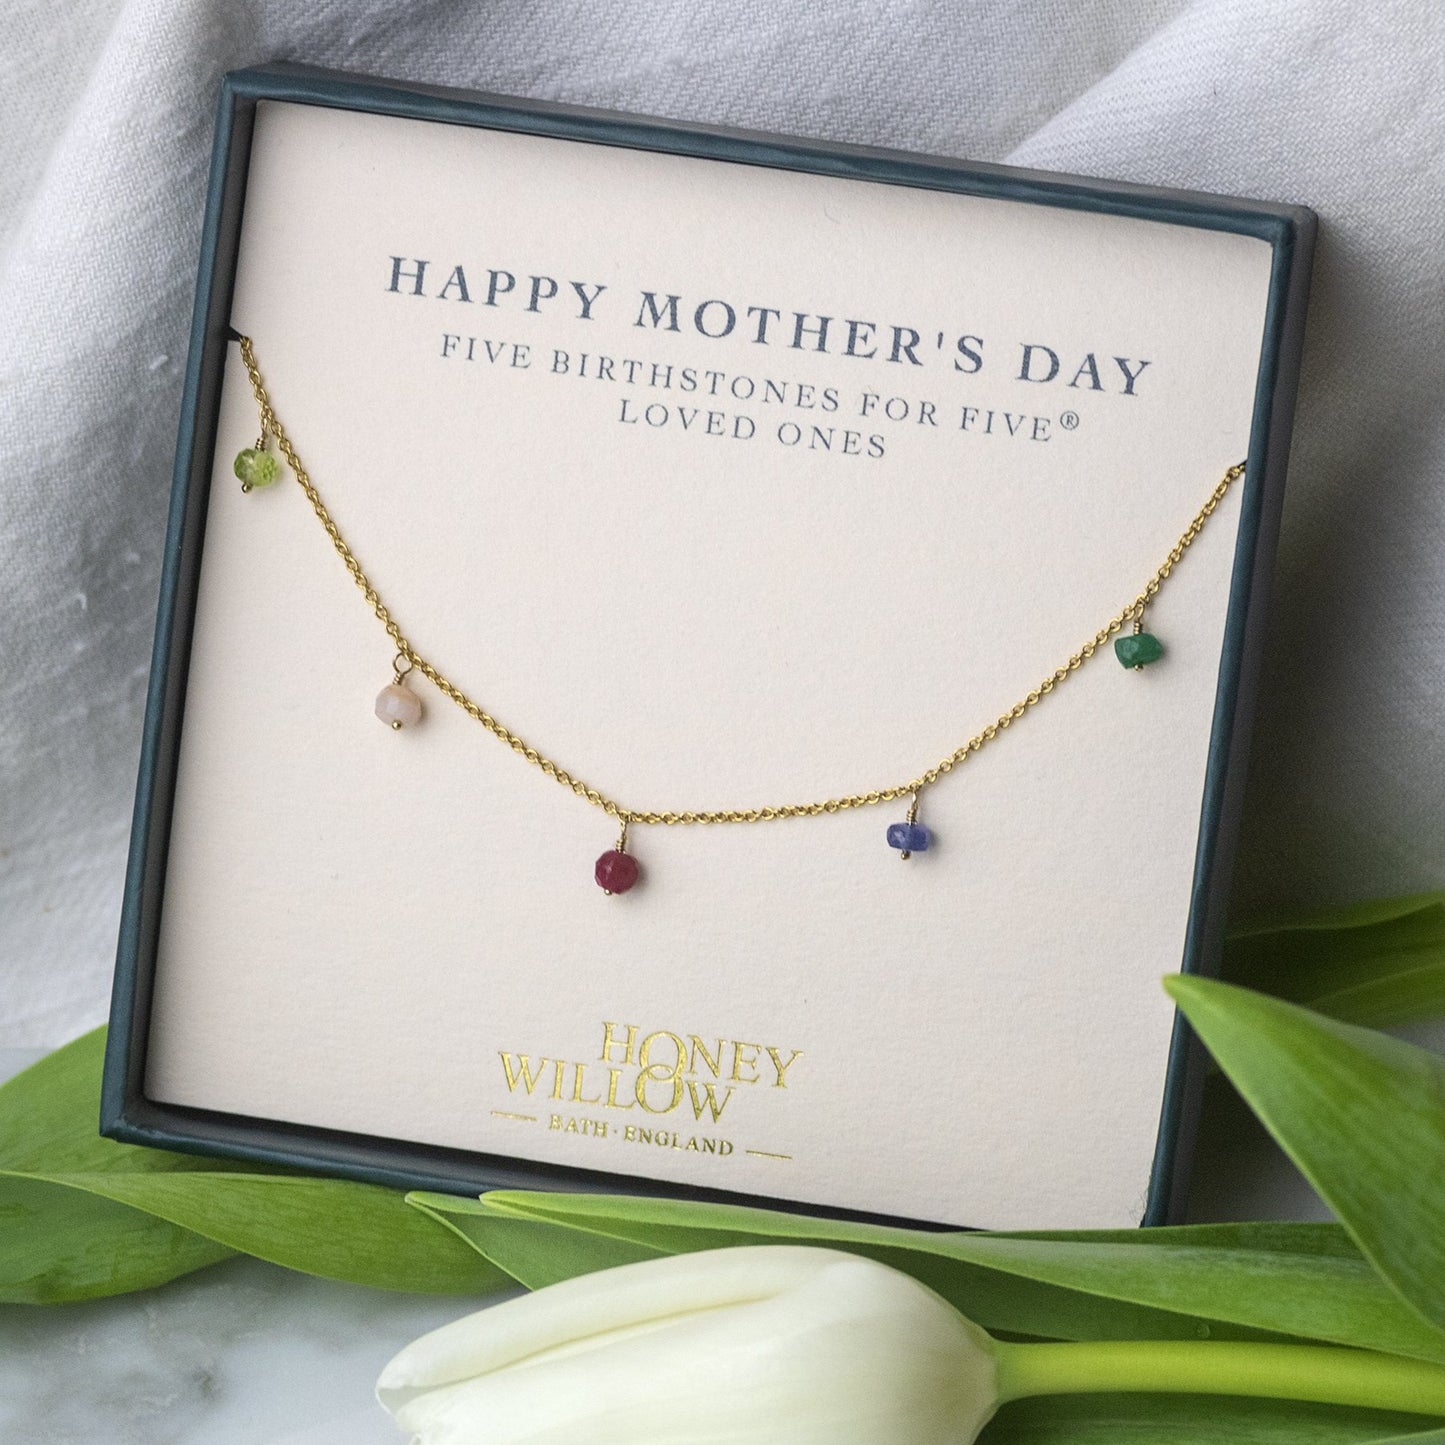 Mother's Day Gift - Delicate Family Birthstone Necklace - 5 Birthstones for 5® Loved Ones